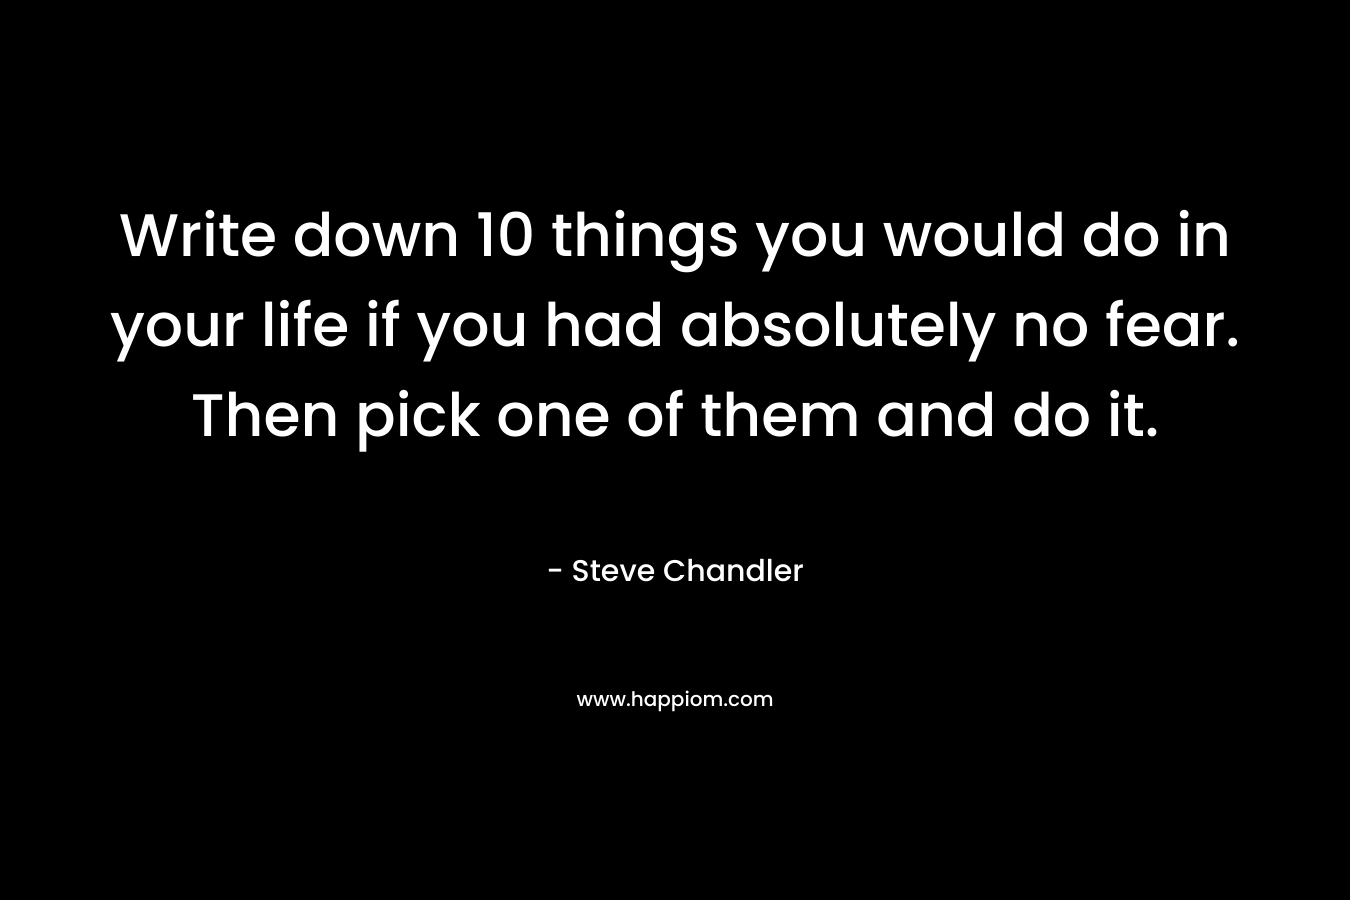 Write down 10 things you would do in your life if you had absolutely no fear. Then pick one of them and do it. – Steve Chandler